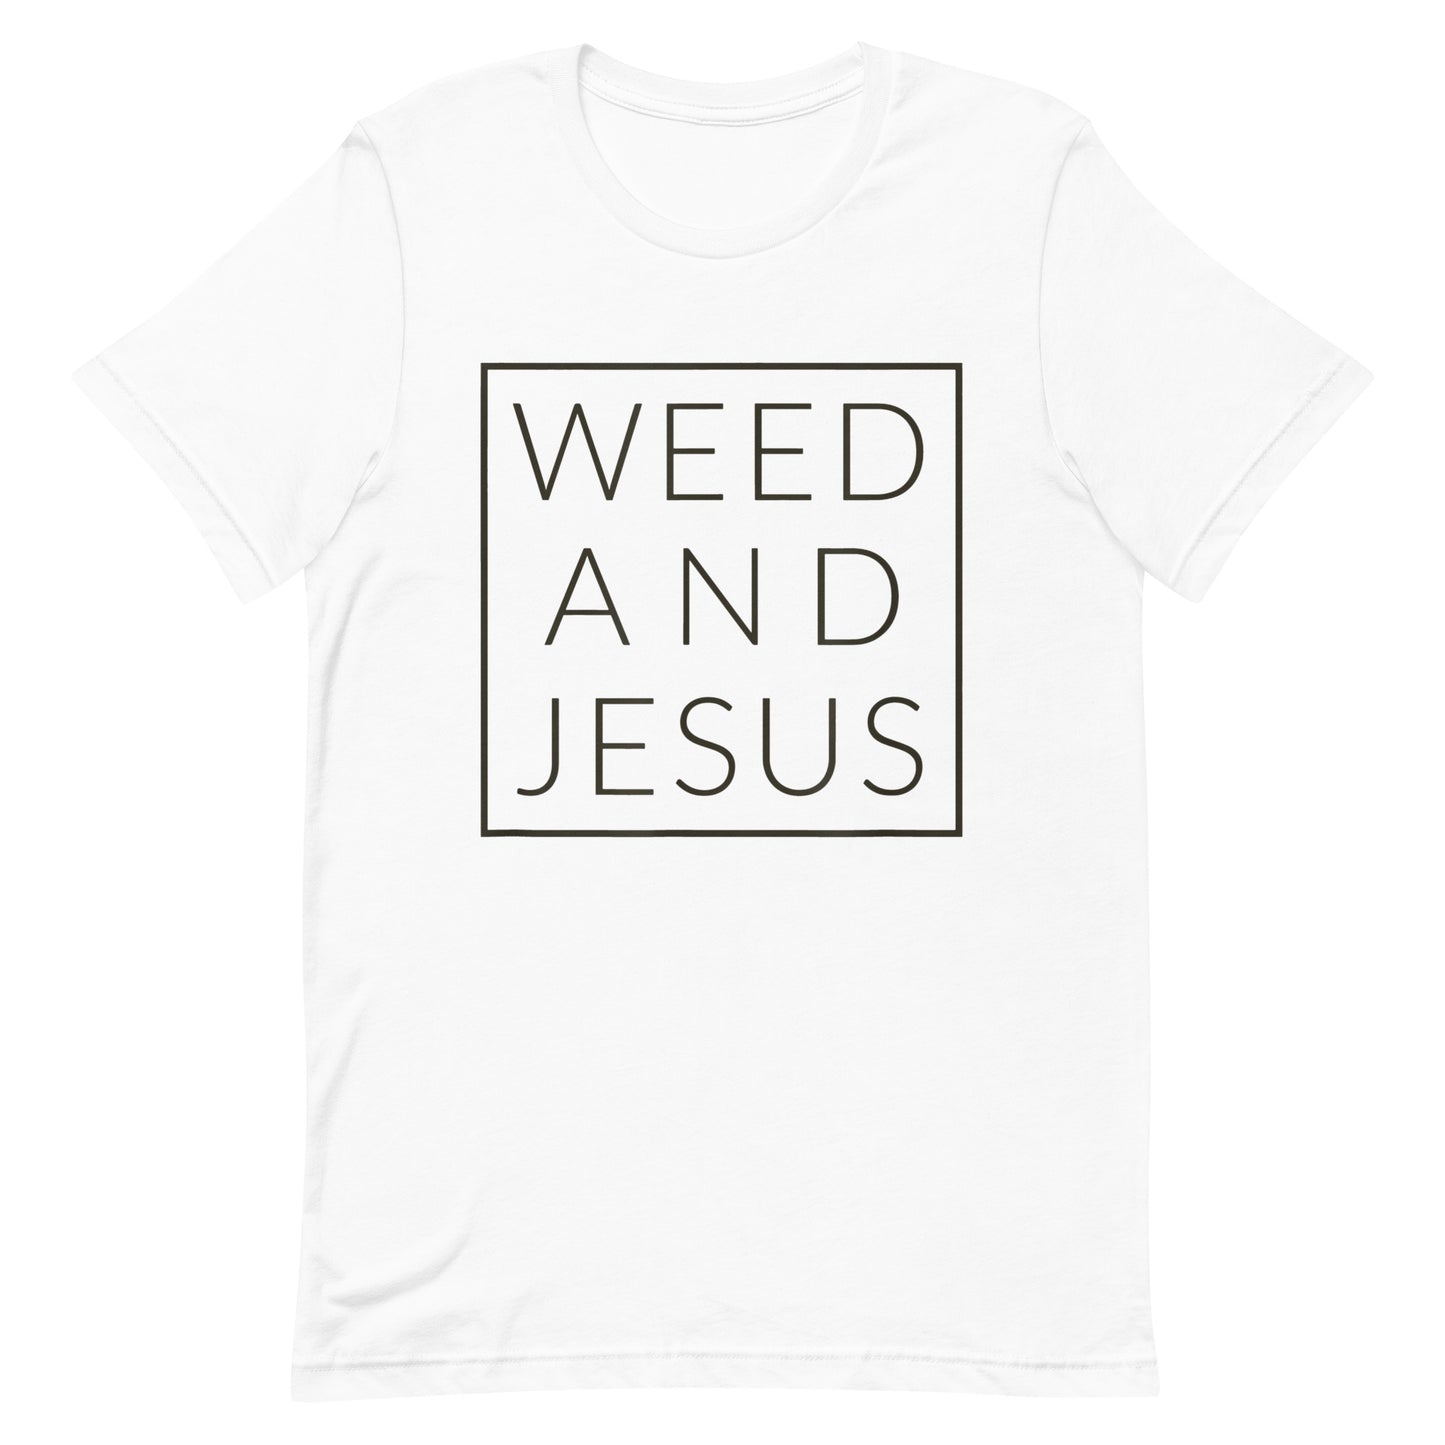 WEED and JESUS Unisex T-shirt